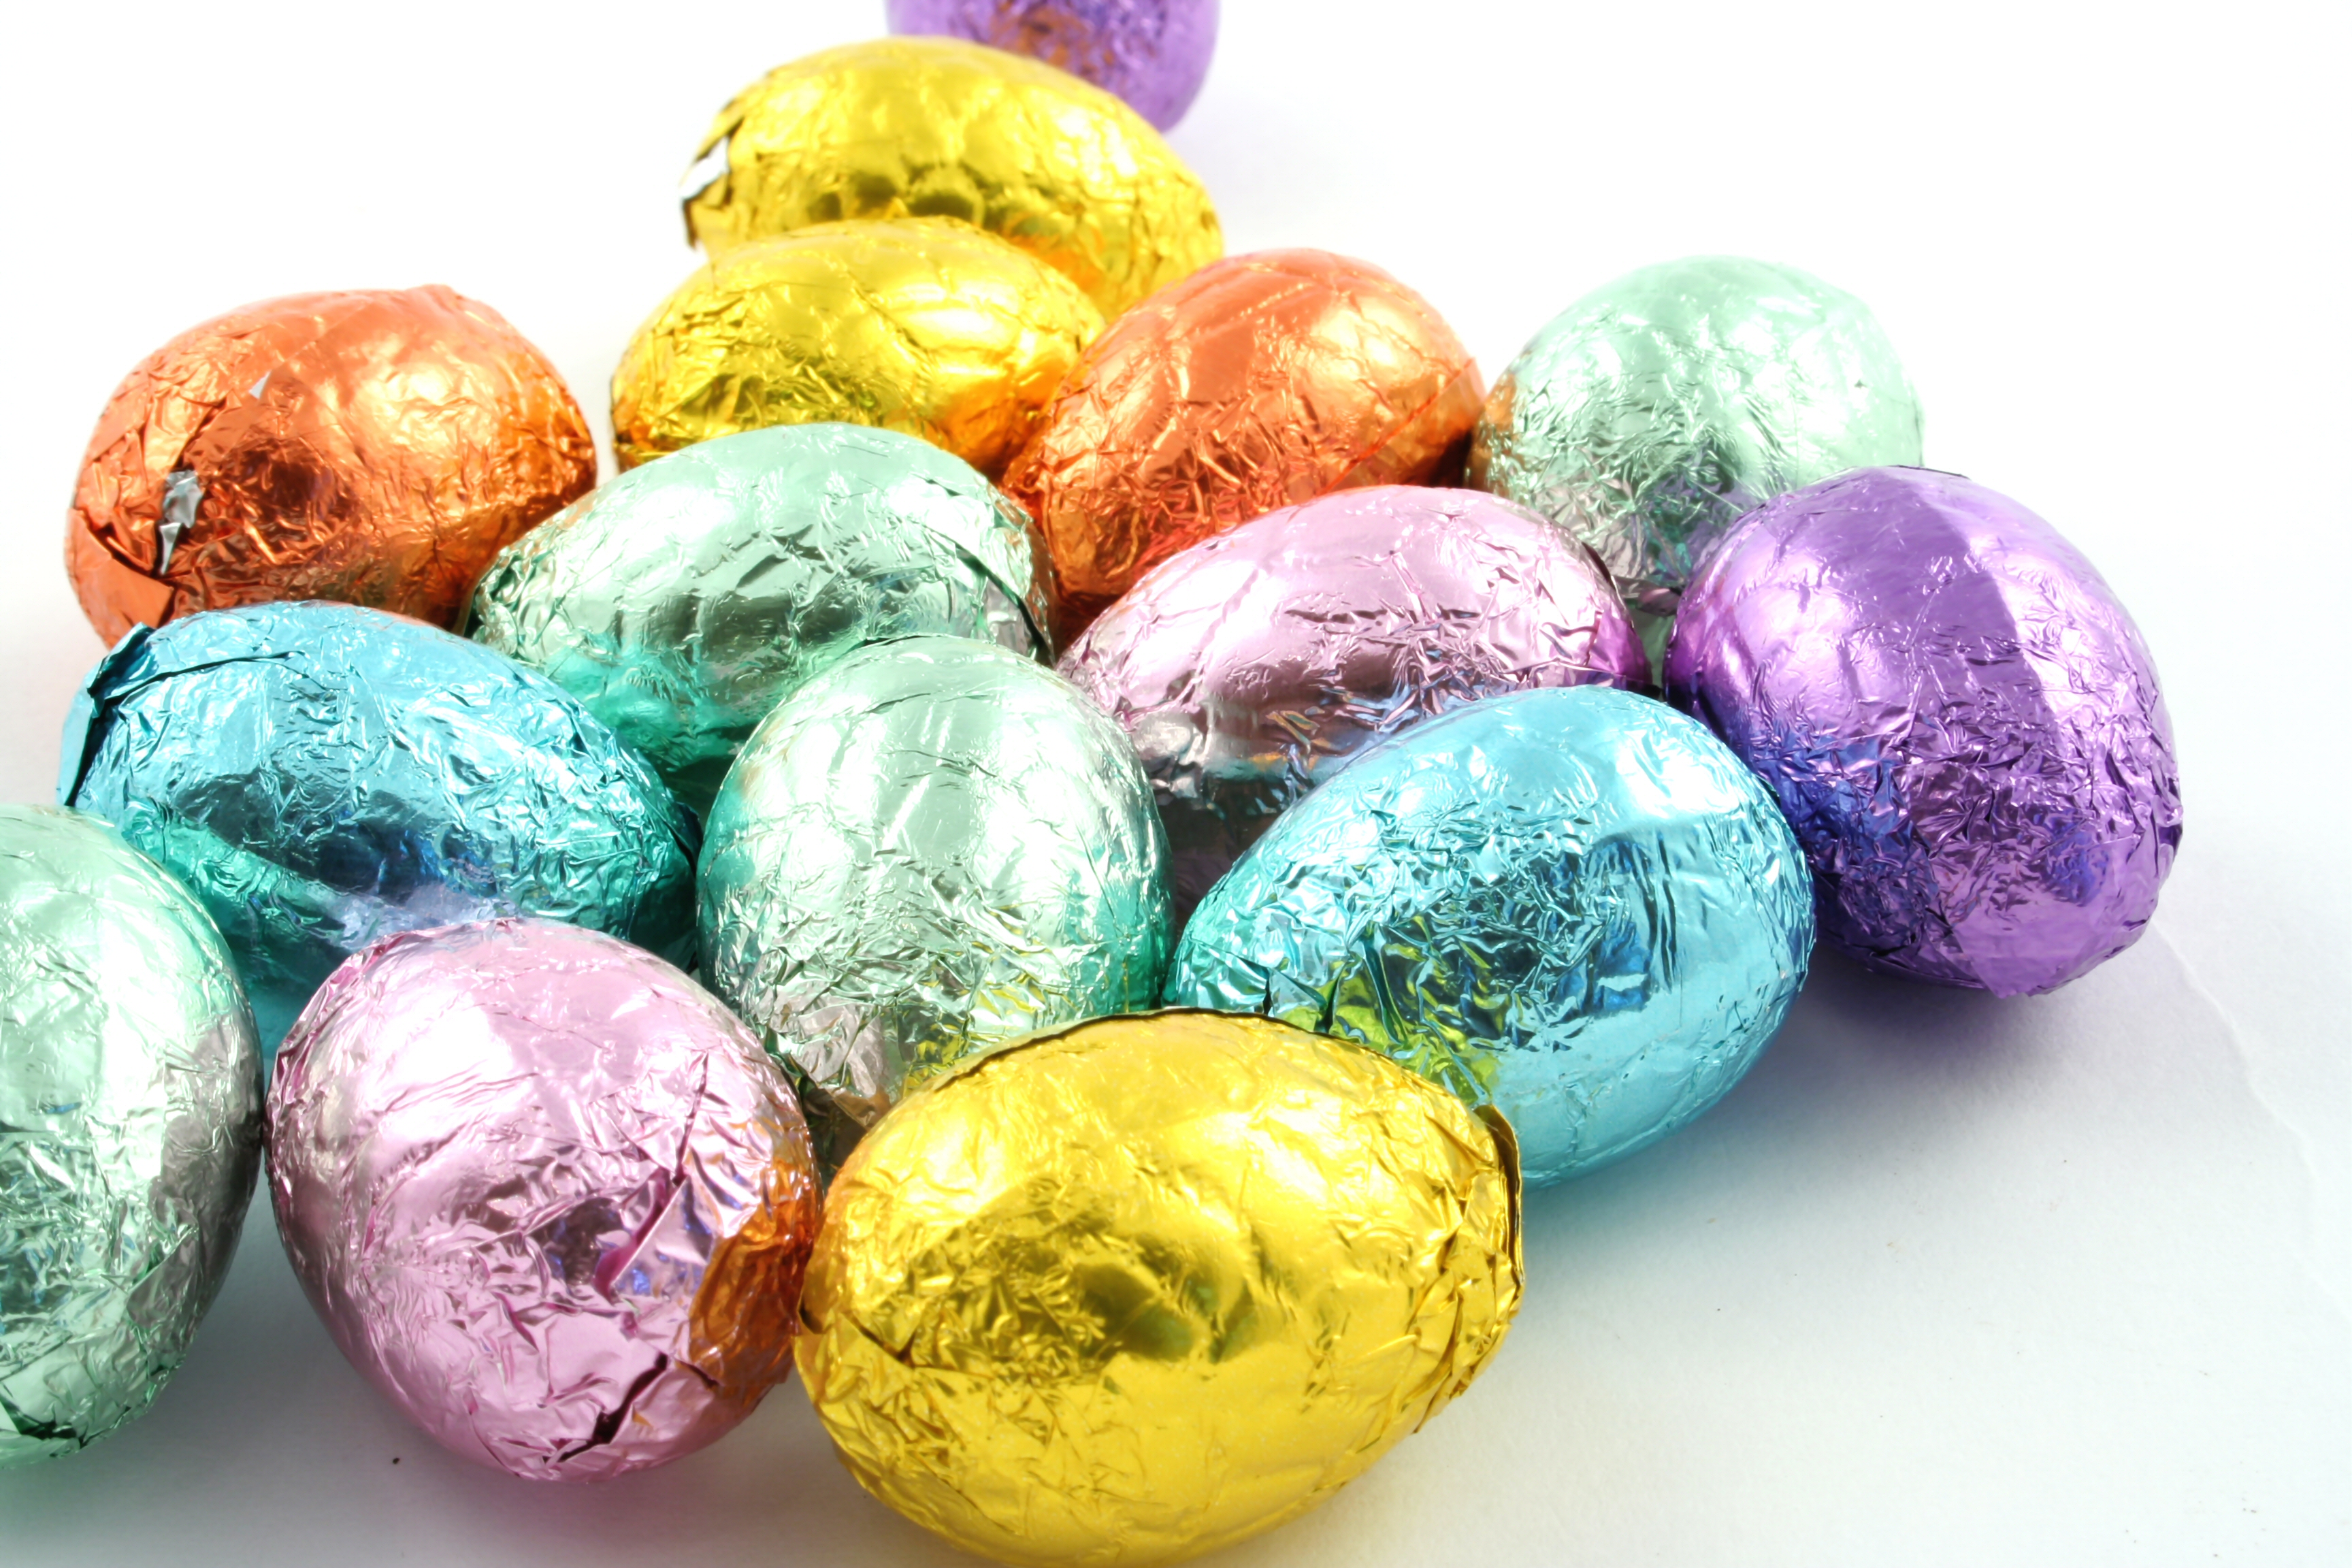 Easter pre-sales hit new heights at Costcutter